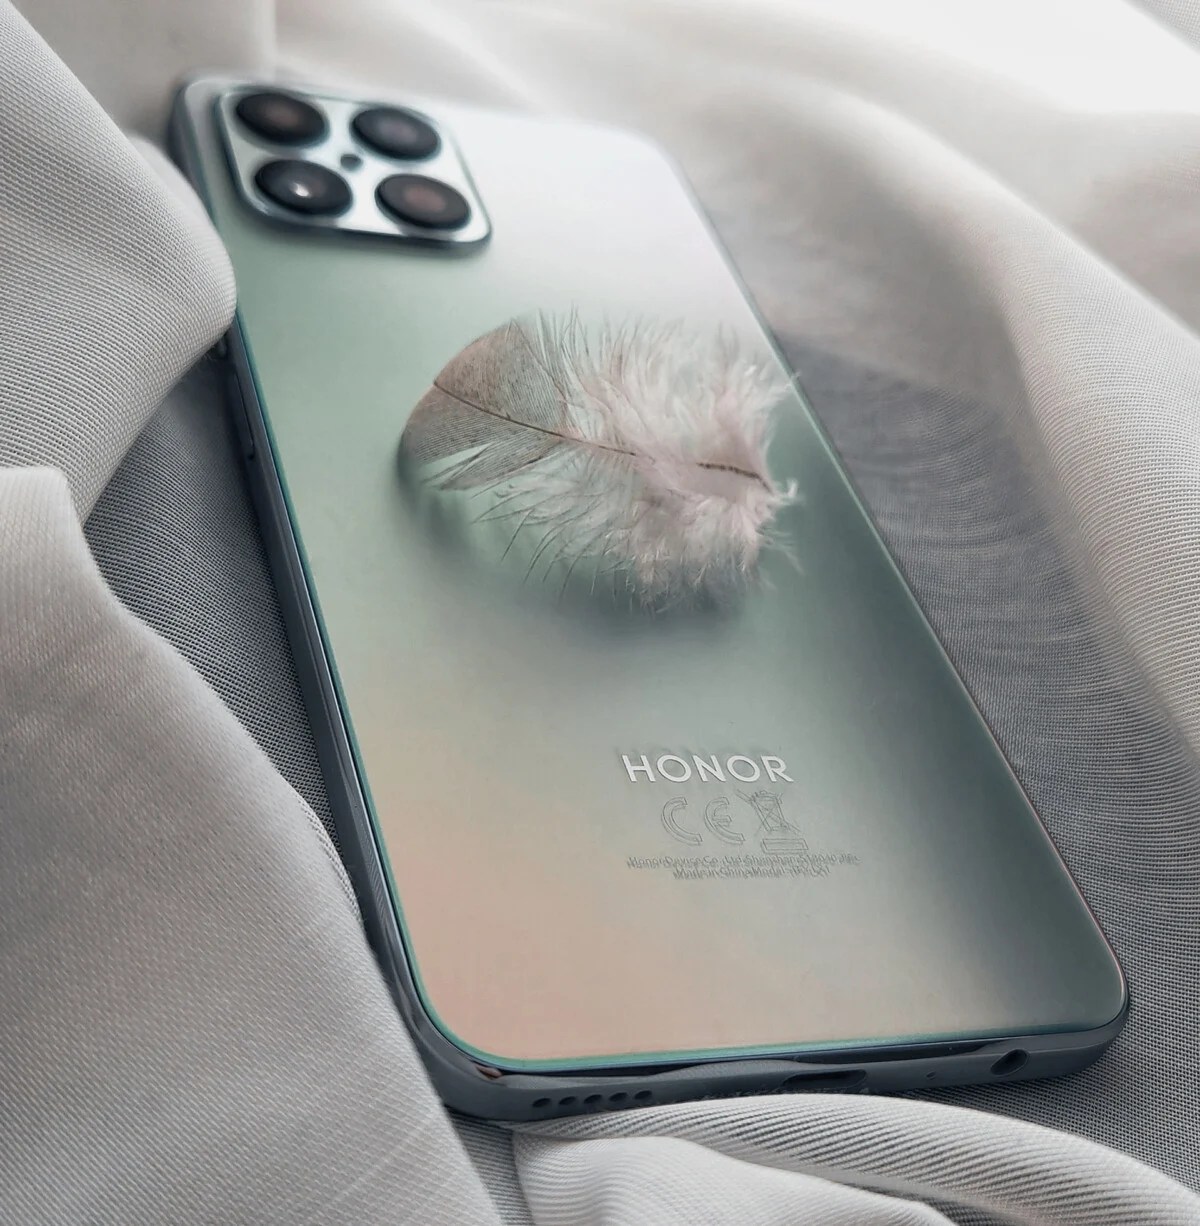 Honor X8: For less than 250 euros, the return of Honor must be taken seriously